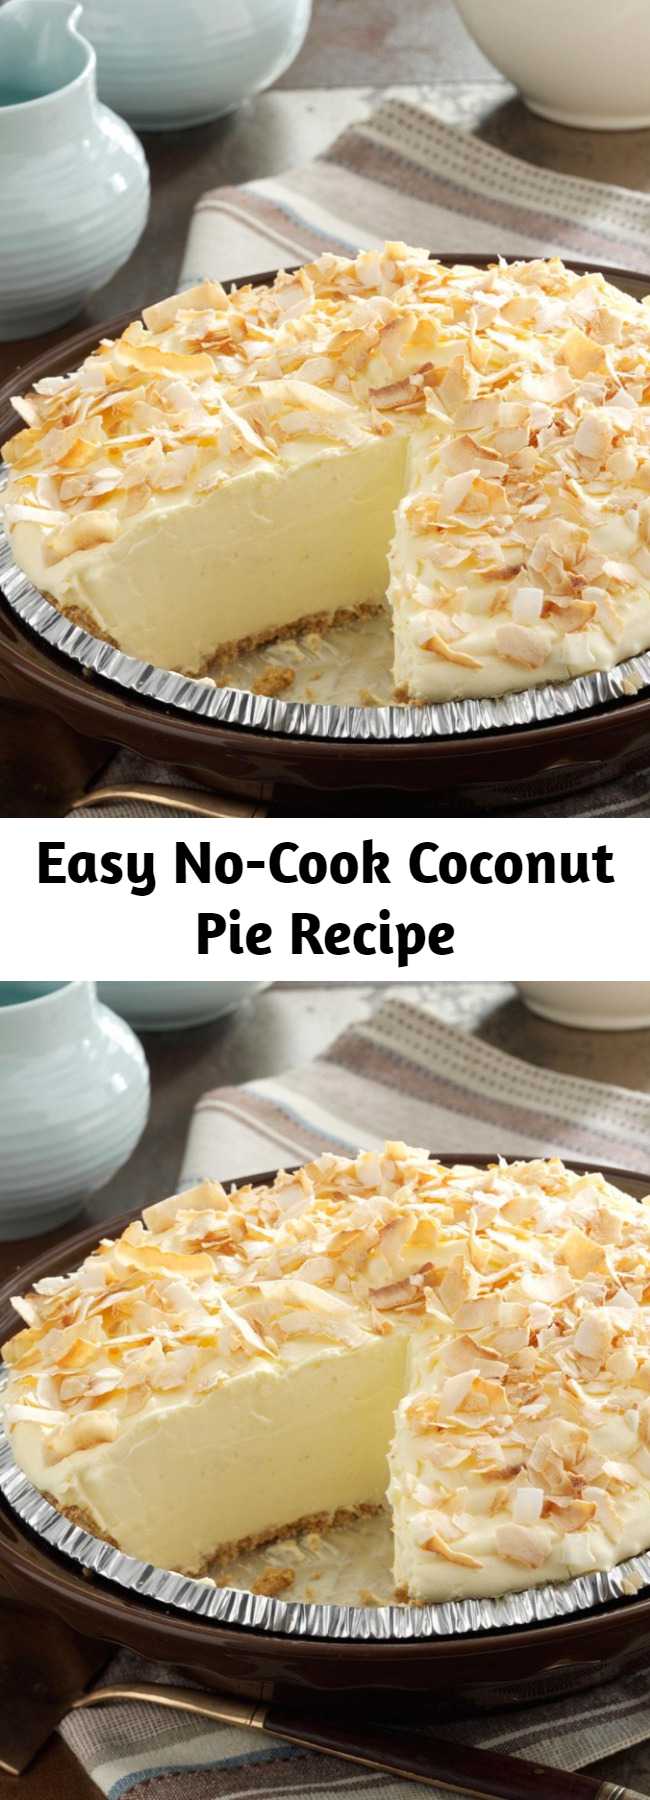 Easy No-Cook Coconut Pie Recipe - This creamy No-Cook Coconut Pie proves that a quick meal doesn't have to go without dessert.